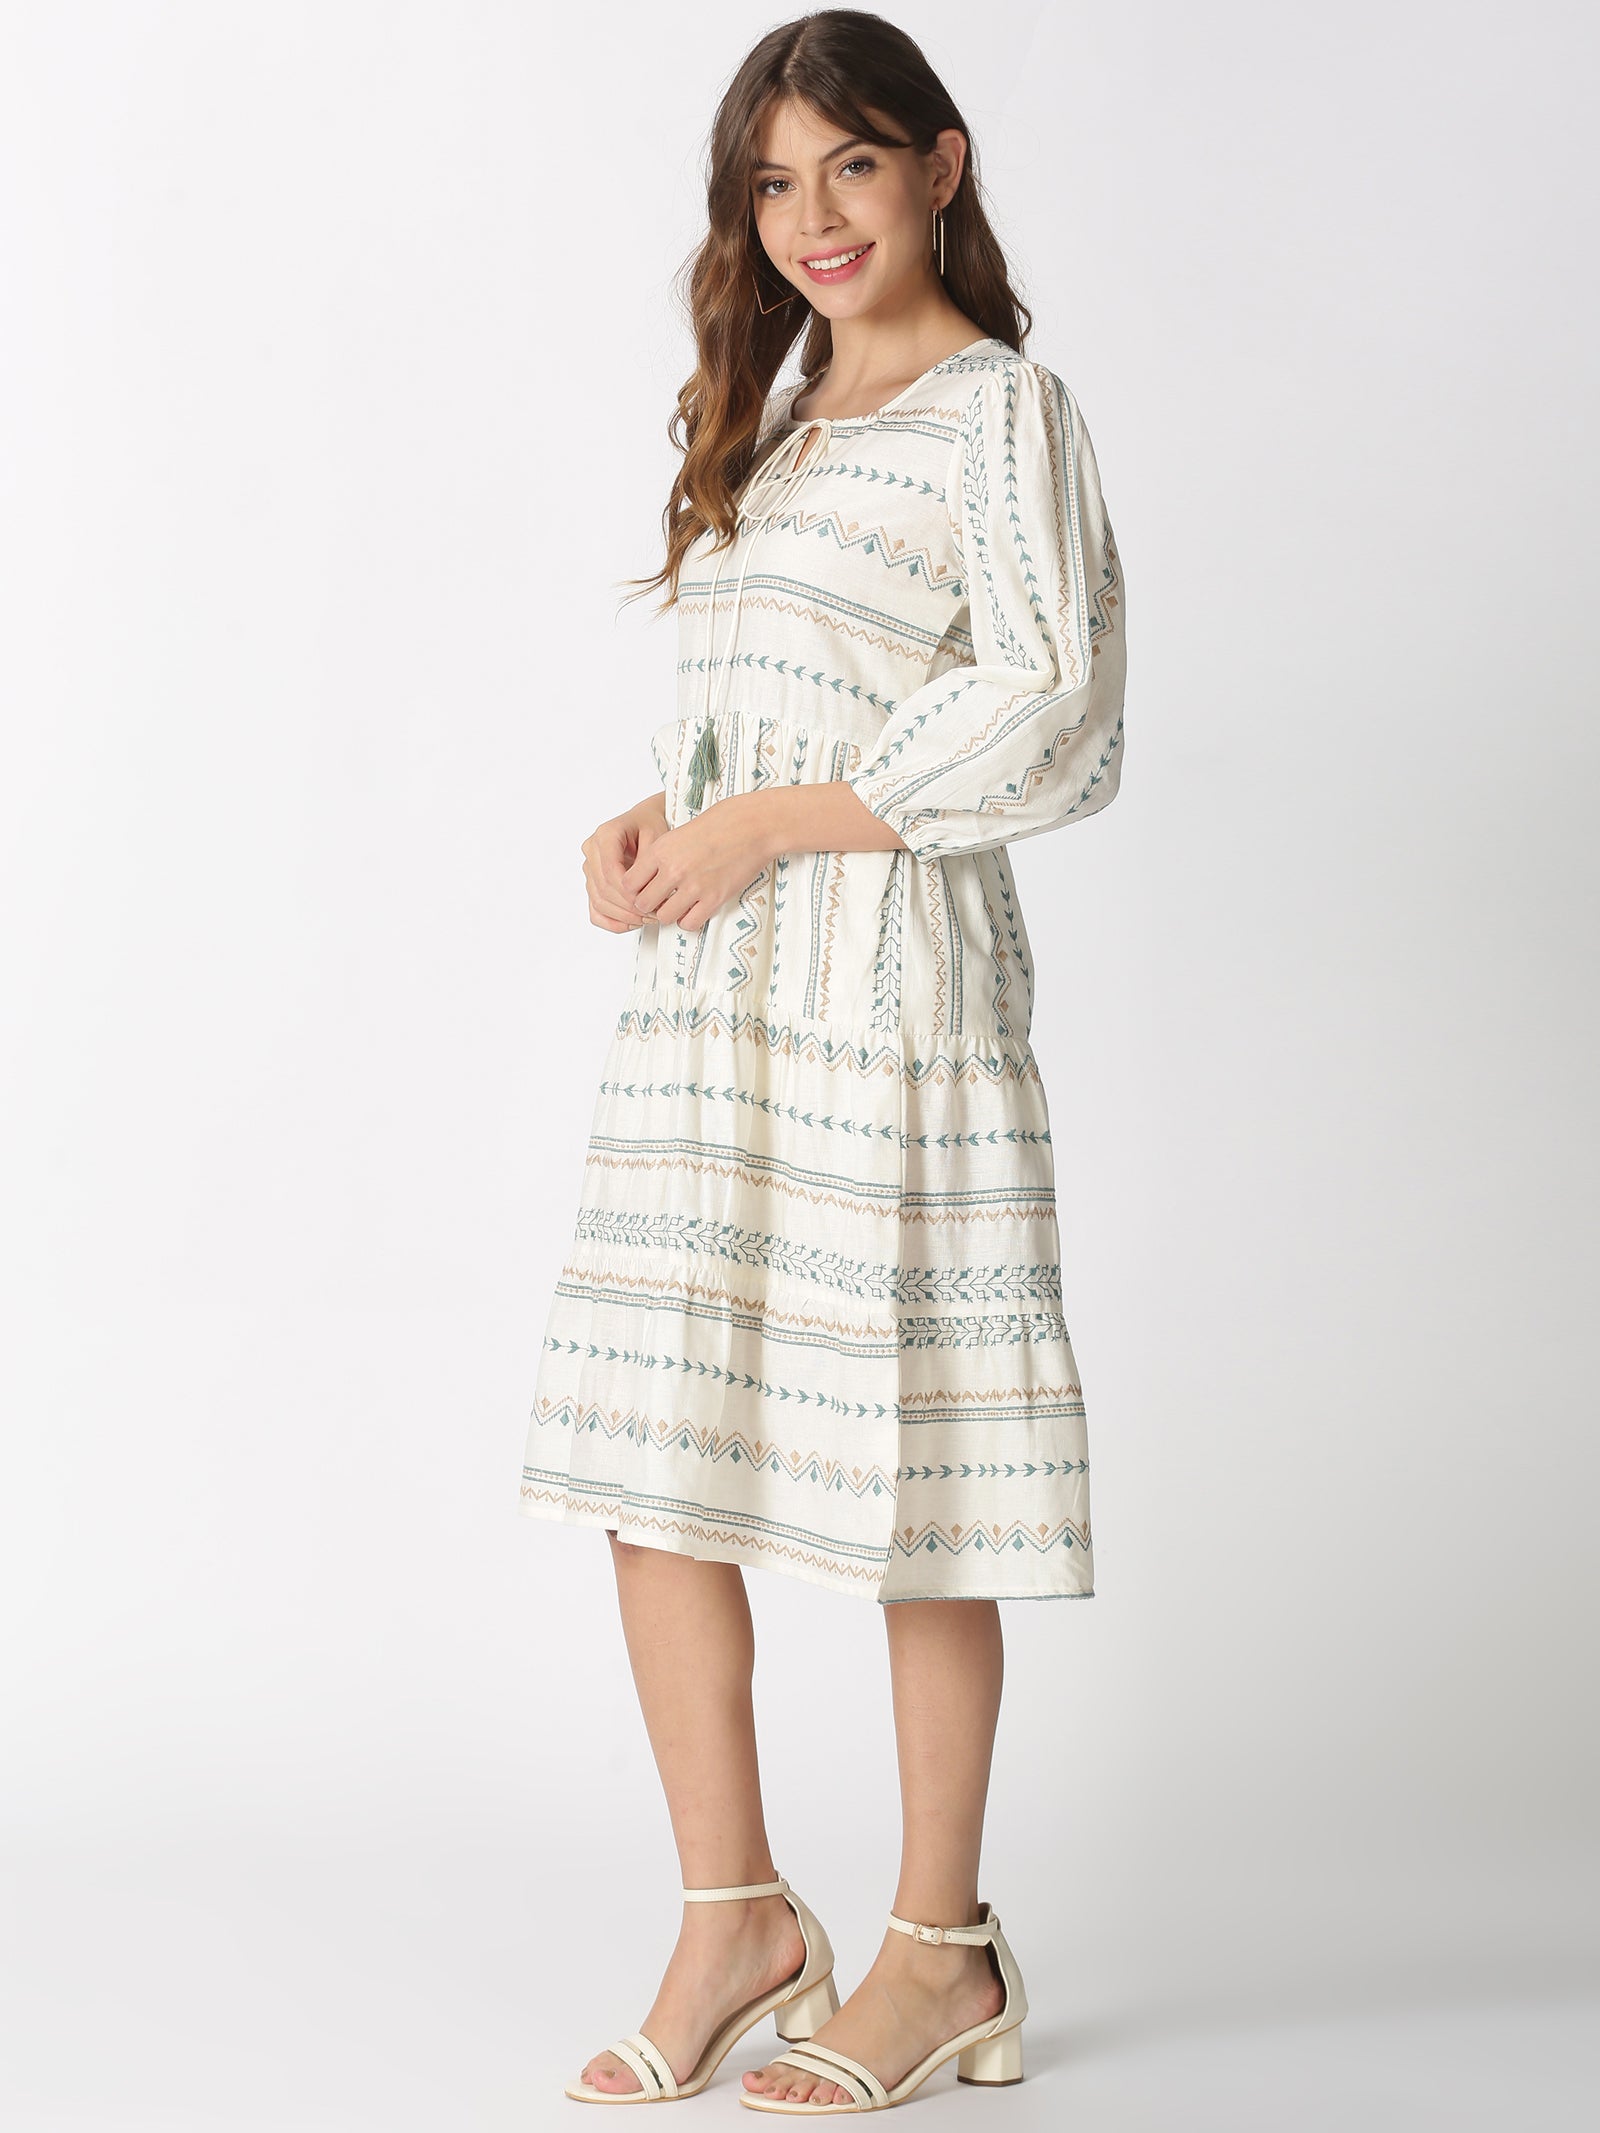 Off White-Blue Cotton Flax Bohemian Embroidered Tiered Dress with Neck Tie-up